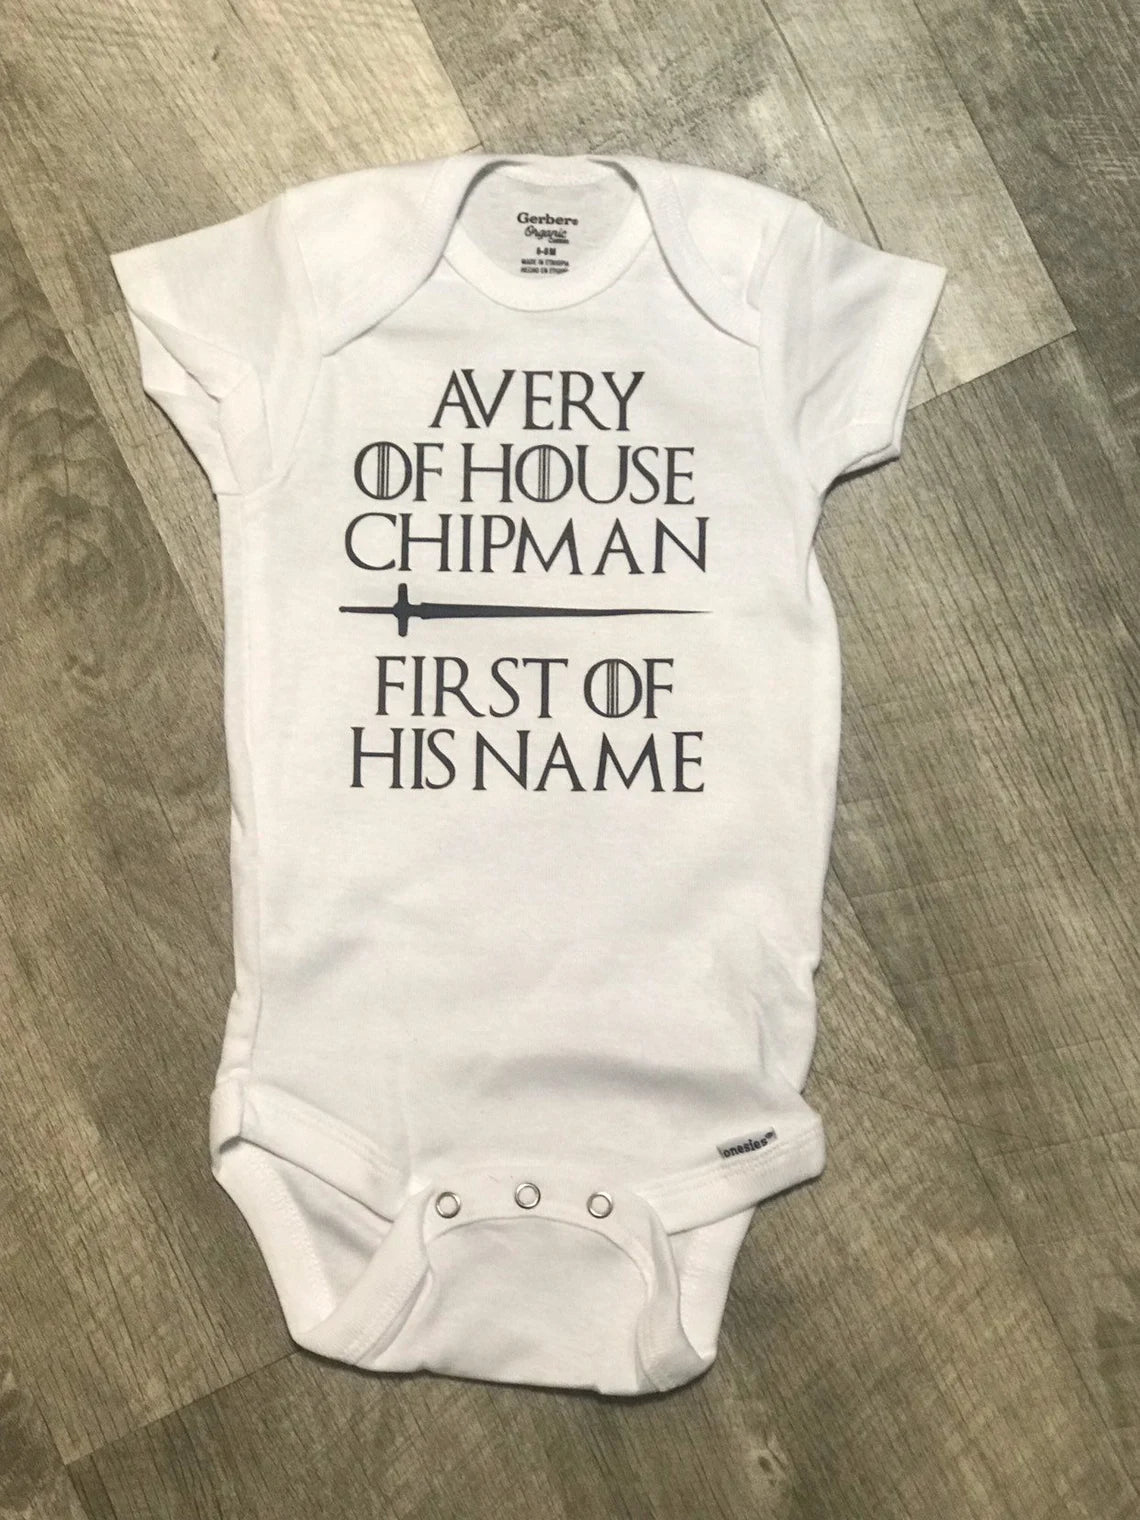 Baby Onesie Bodysuit Baby gift Baby shower Infant Baby Clothing Game of Thrones First of his Name House of GOT Coming Home Outfit